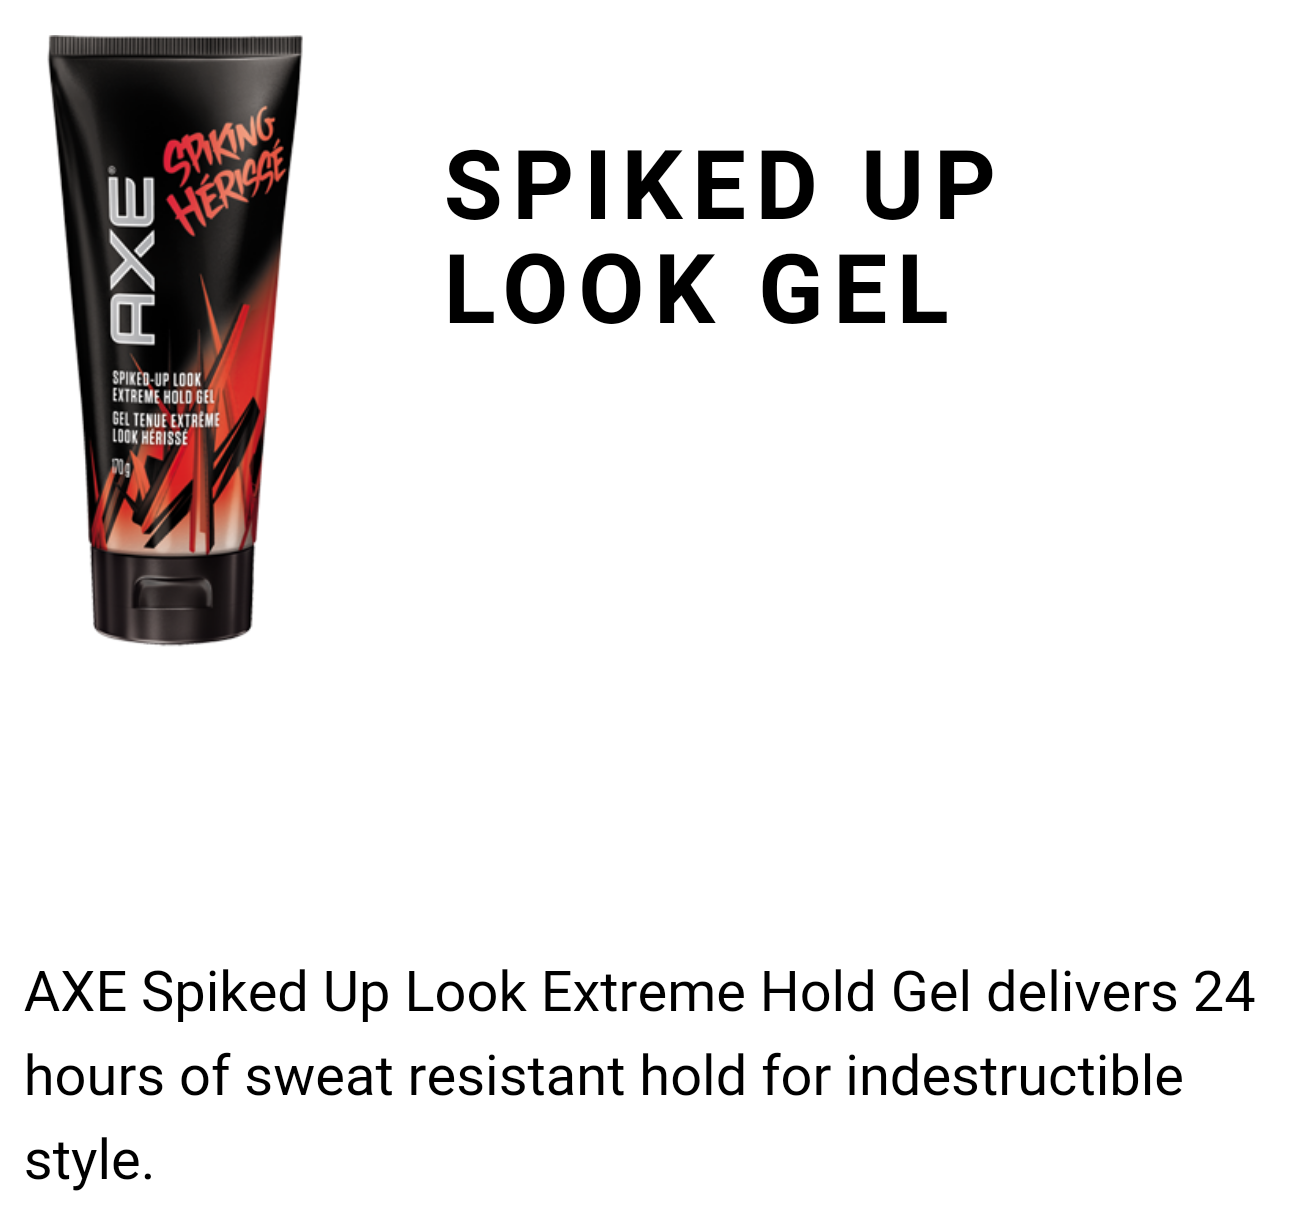 #AXEGOTSTYLE Spiked-Up Look Gel